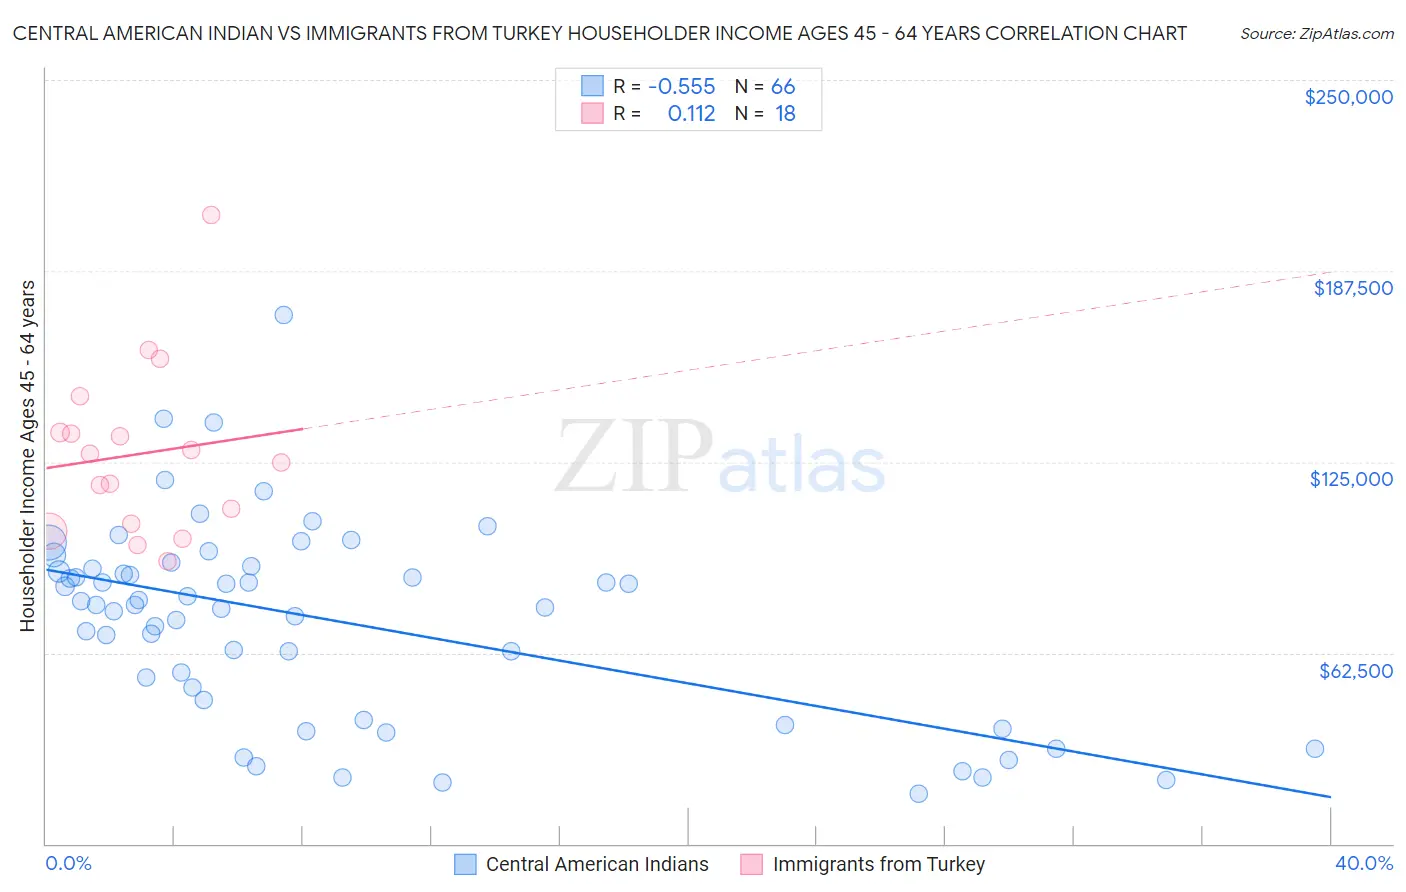 Central American Indian vs Immigrants from Turkey Householder Income Ages 45 - 64 years